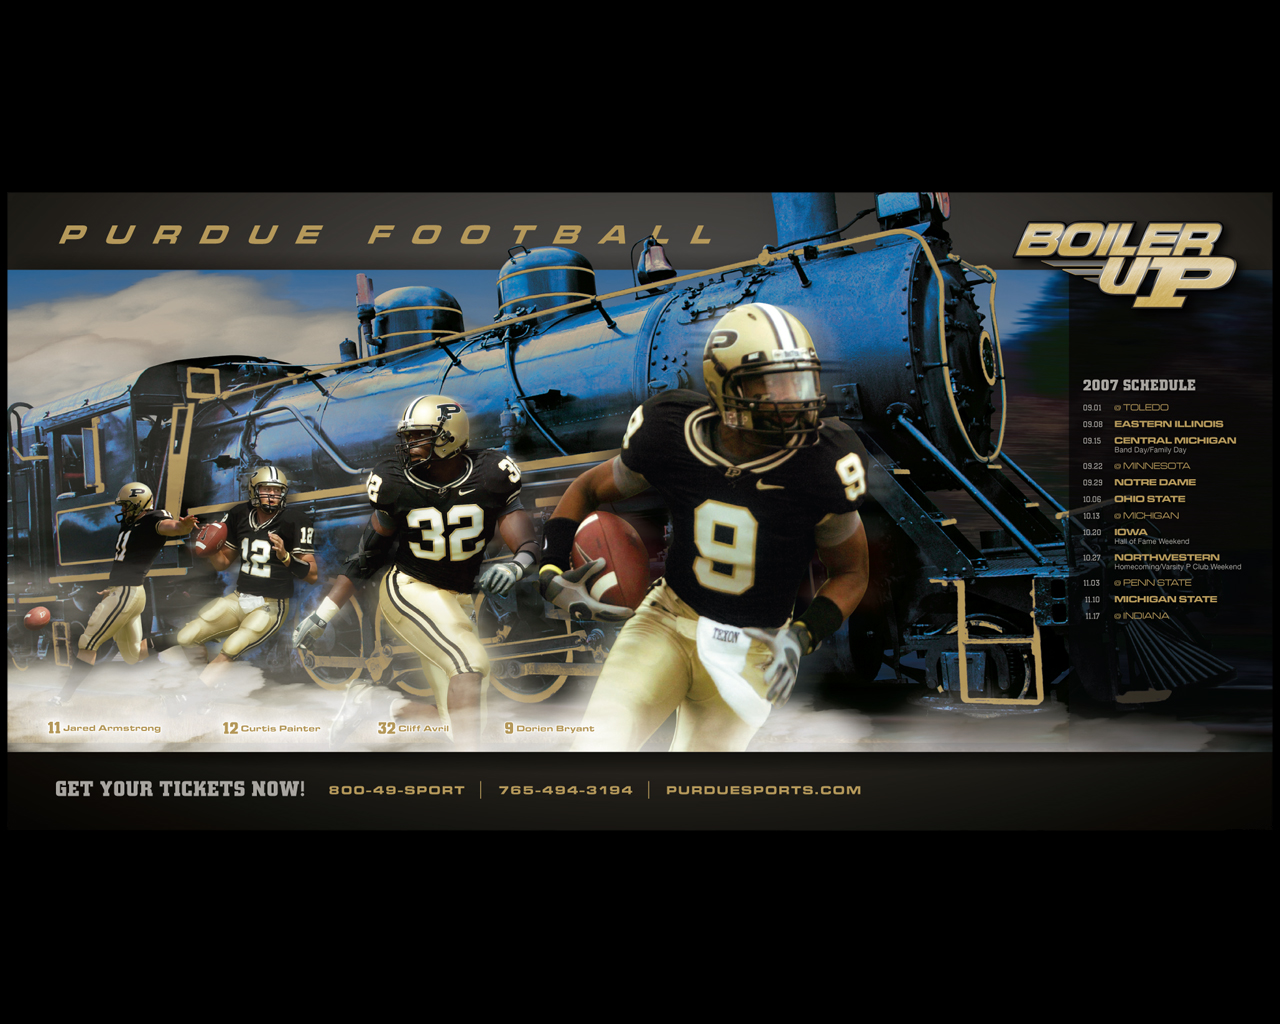 PURDUESPORTSCOM   PURDUESPORTSCOM   Purdue University Official